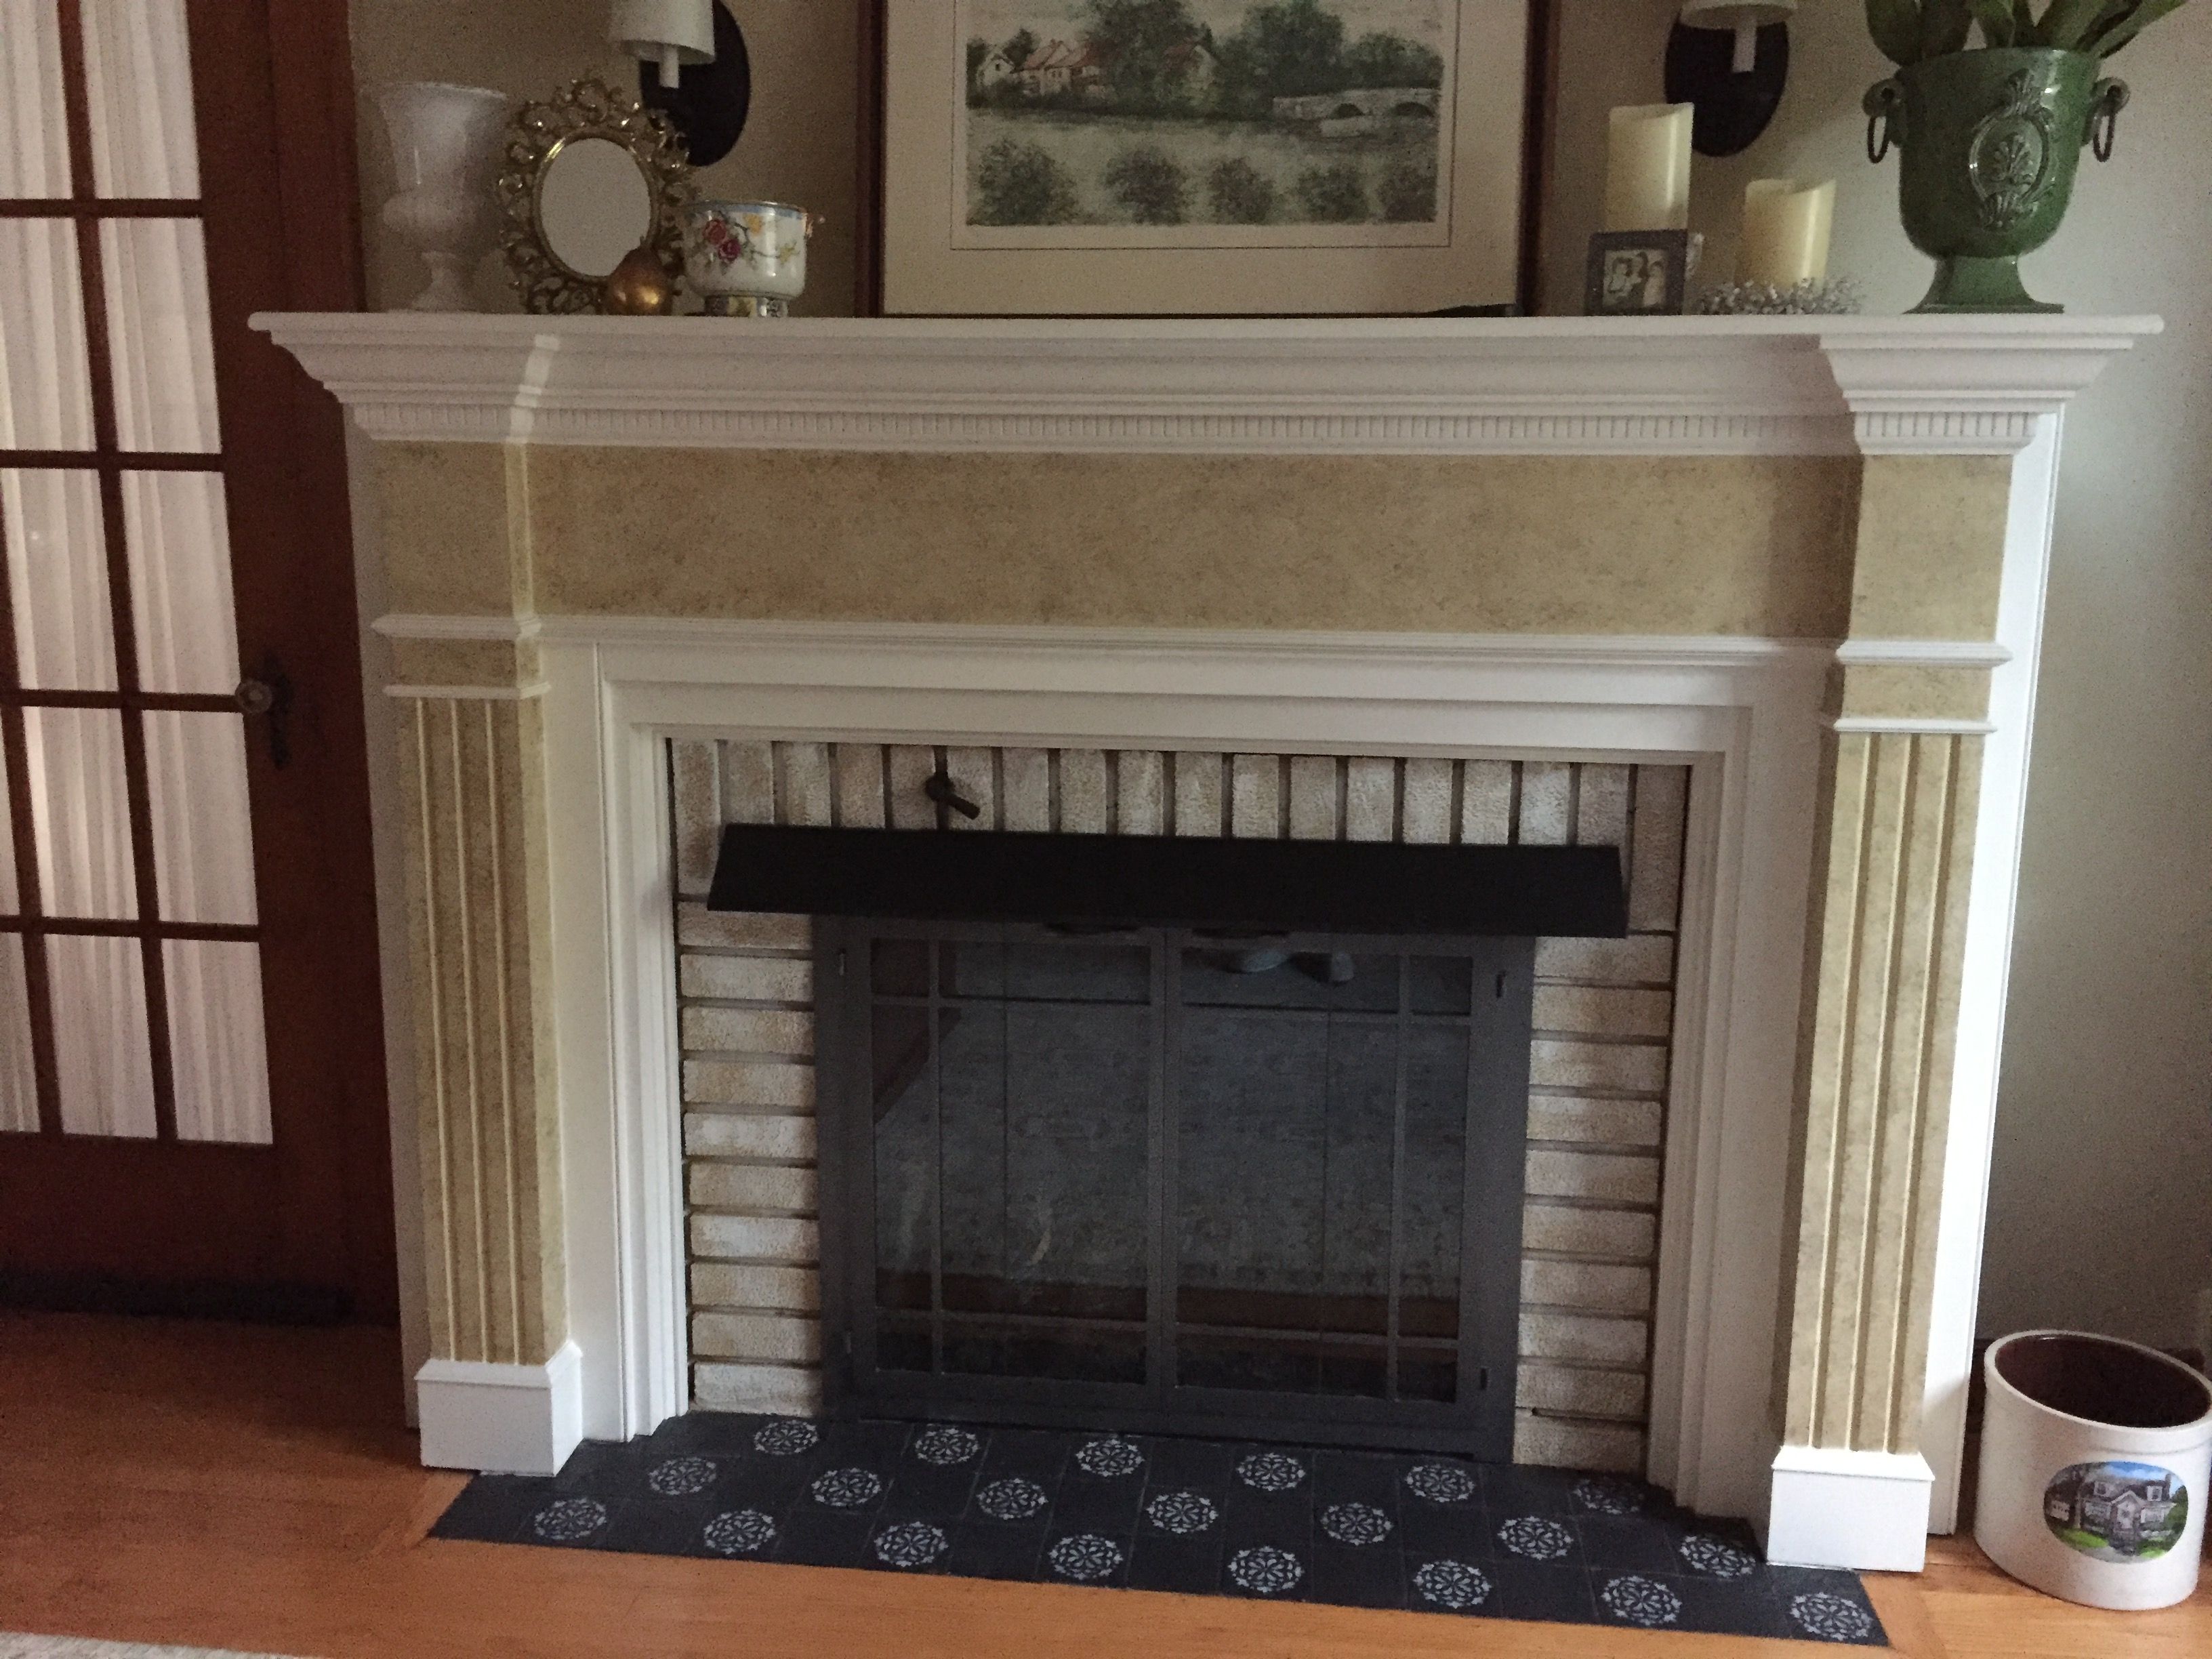 Refurbish Fireplace Best Of Stencil Over Black Tile Just to Jazz Up the Fireplace